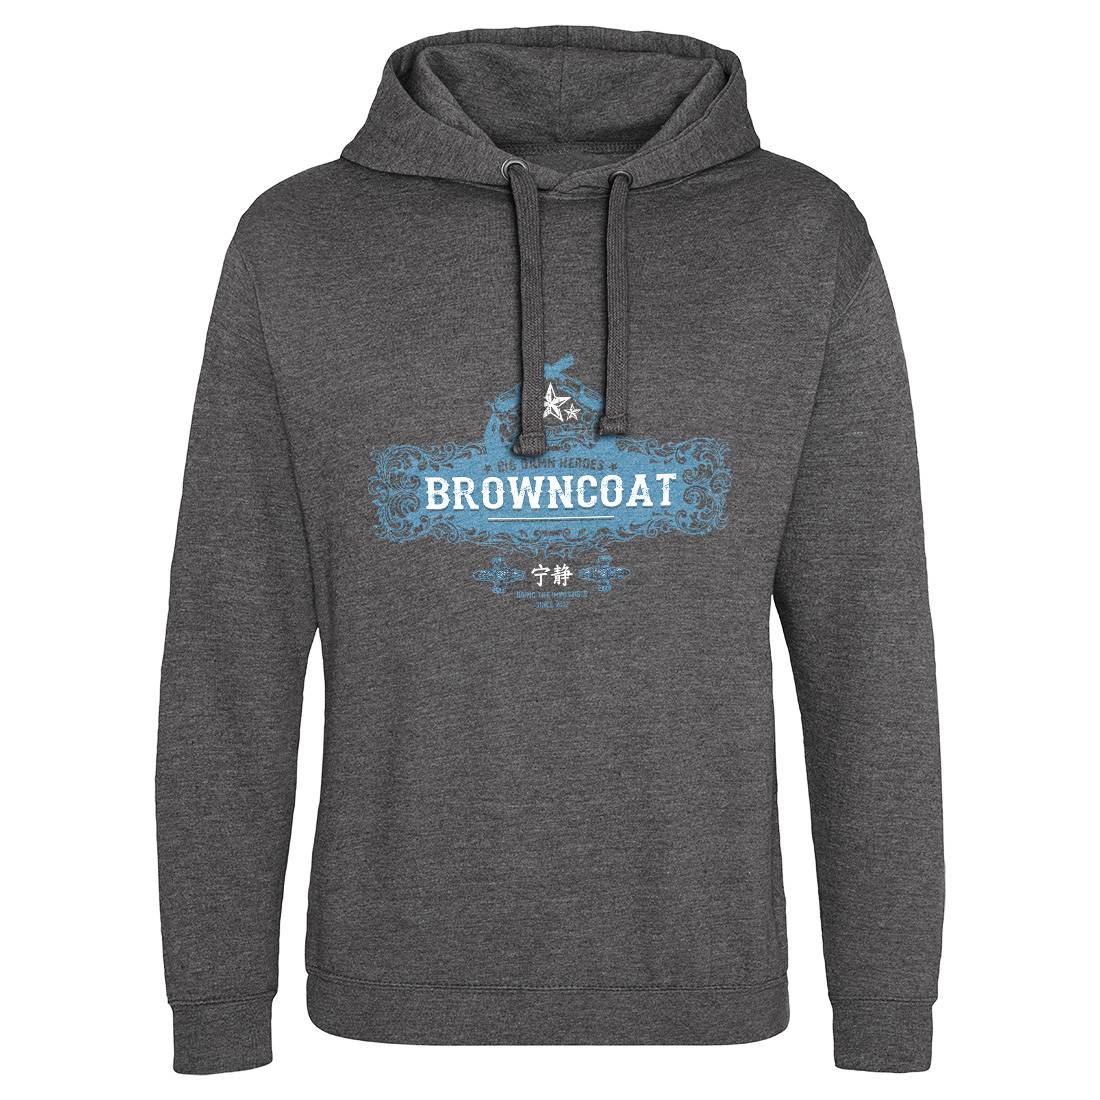 Browncoat Mens Hoodie Without Pocket Space D350